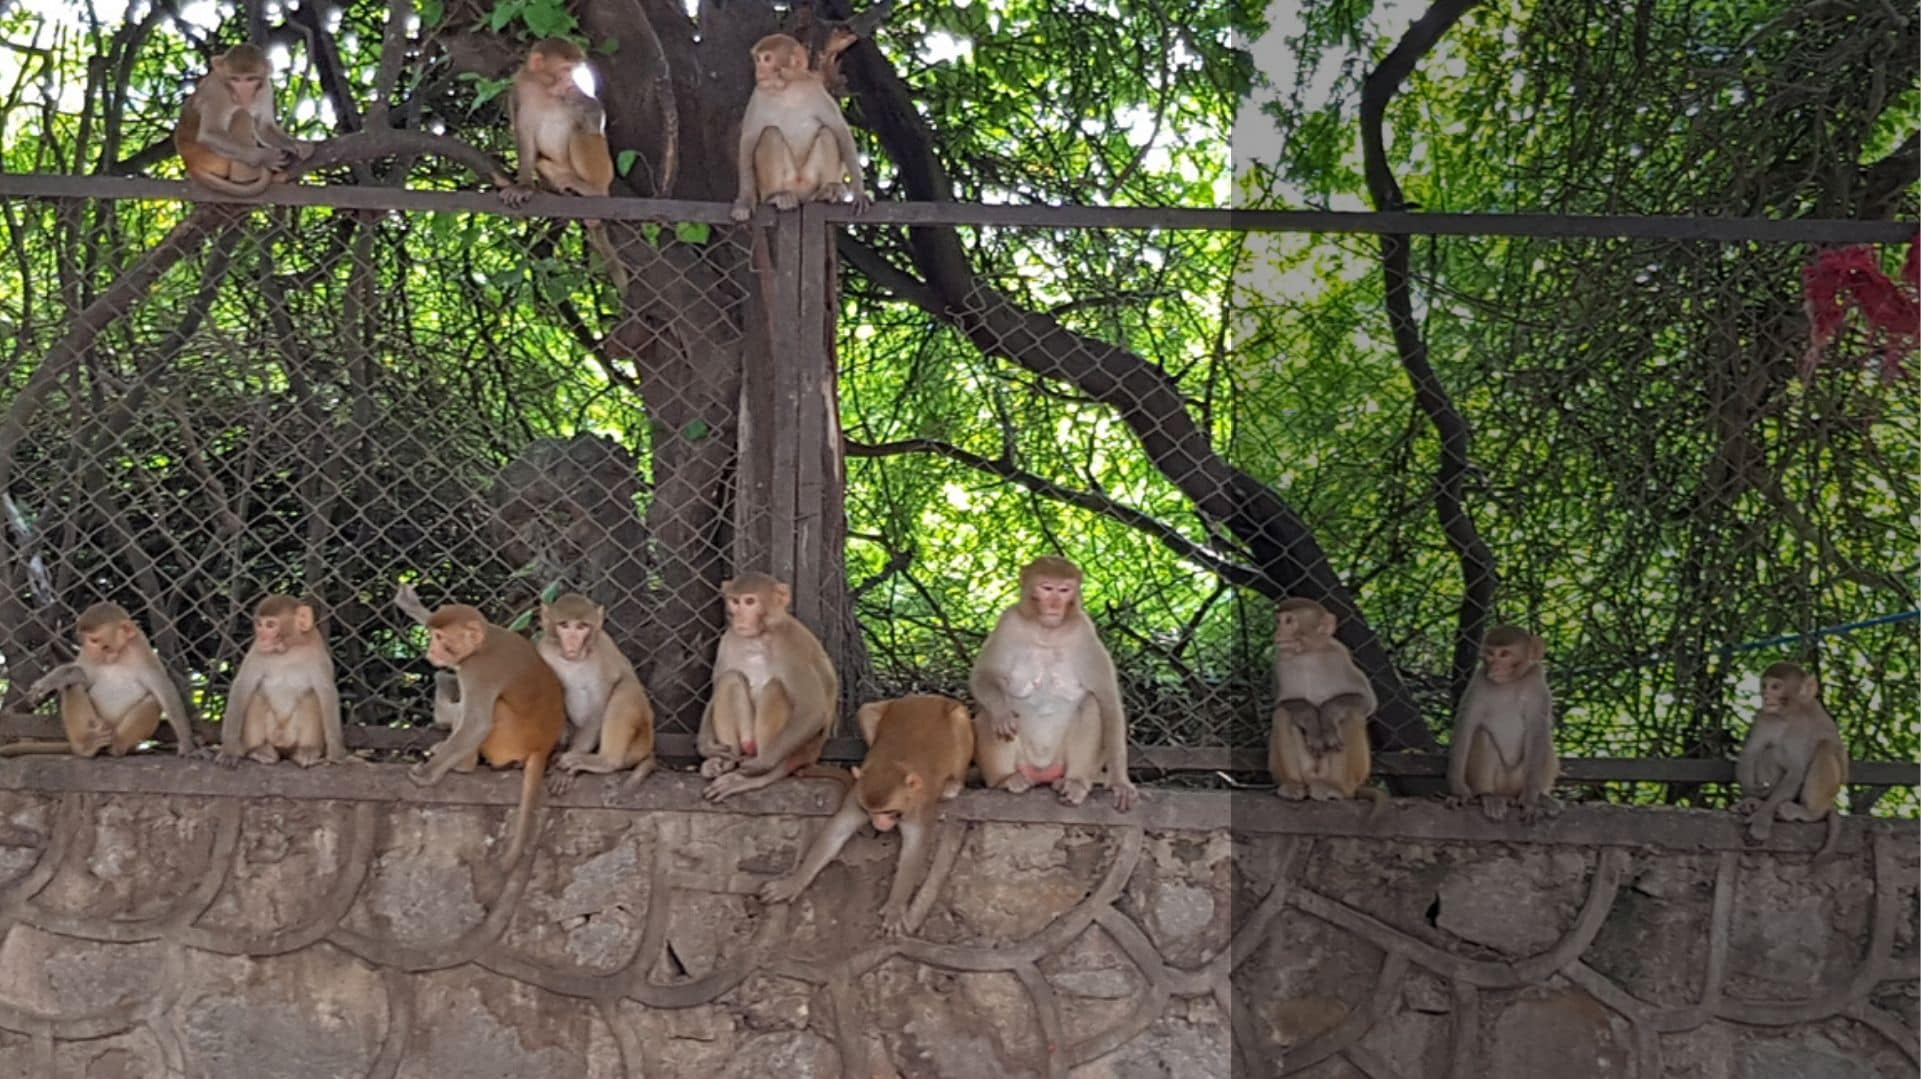 Monitoring Delhi's monkey business: Will a census, professional mimics help tackle growing primate population?